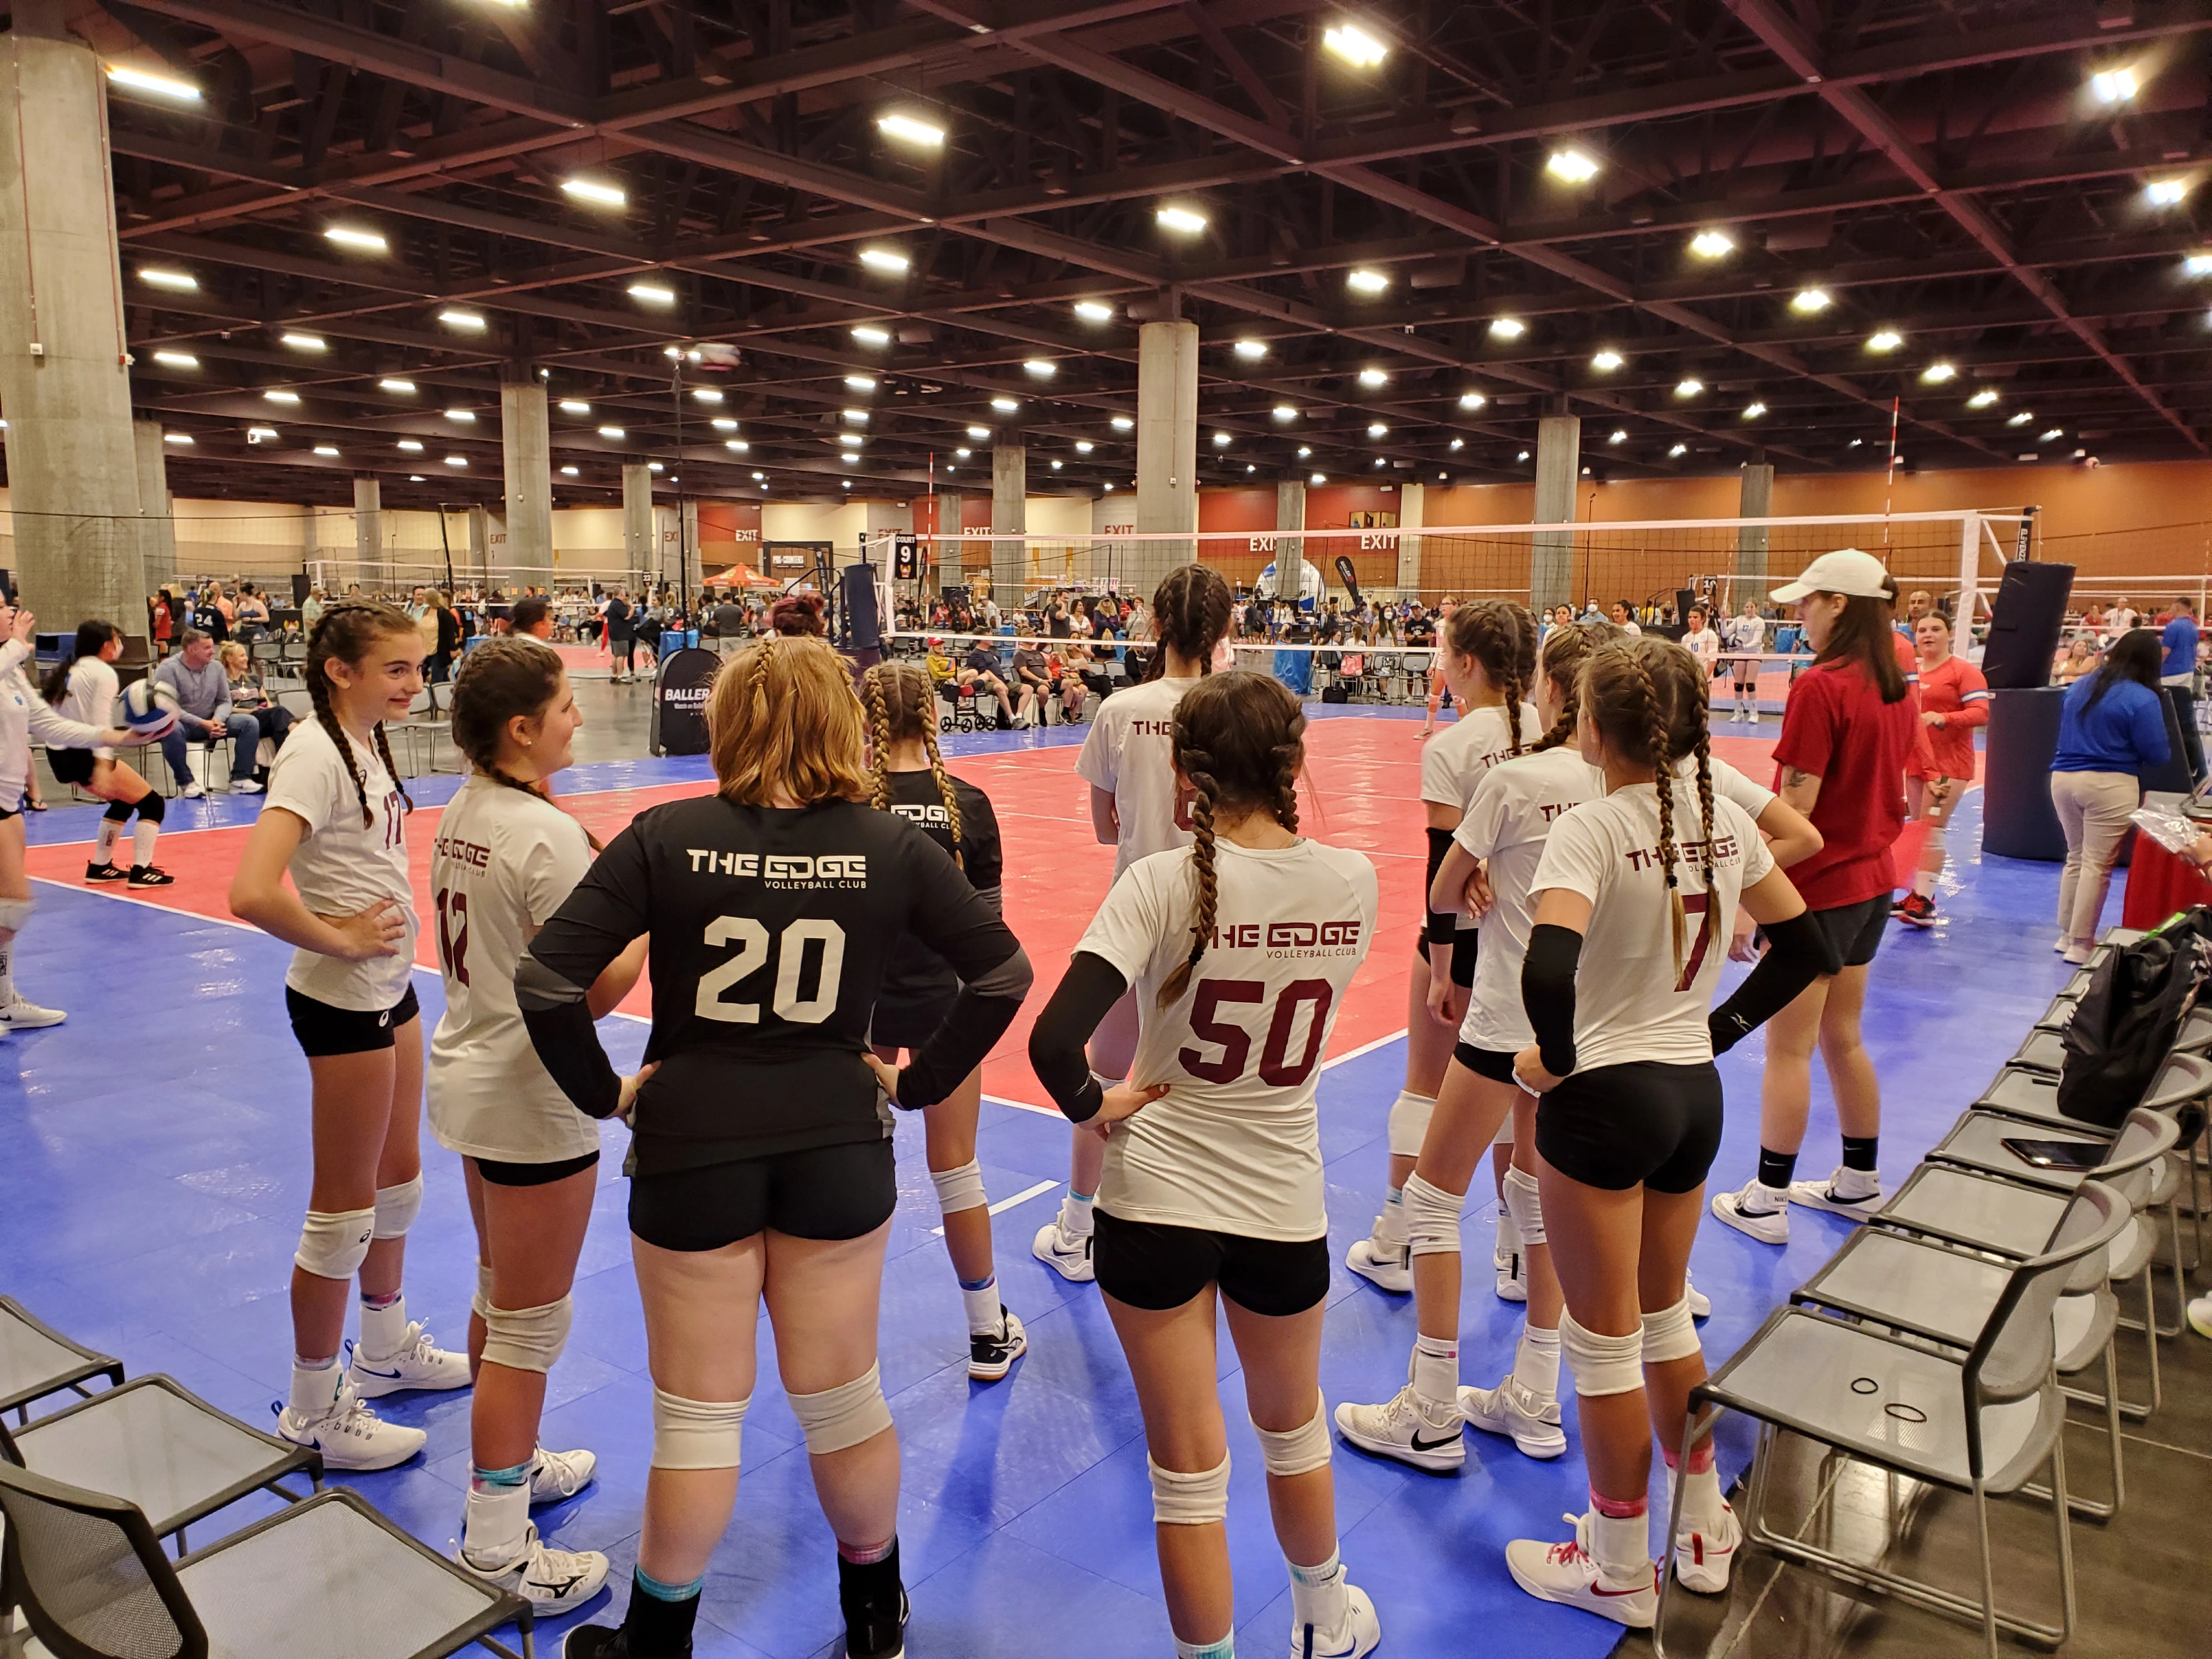 An Edge Volleyball Club team preparing for their upcoming game at a national qualifier tournament